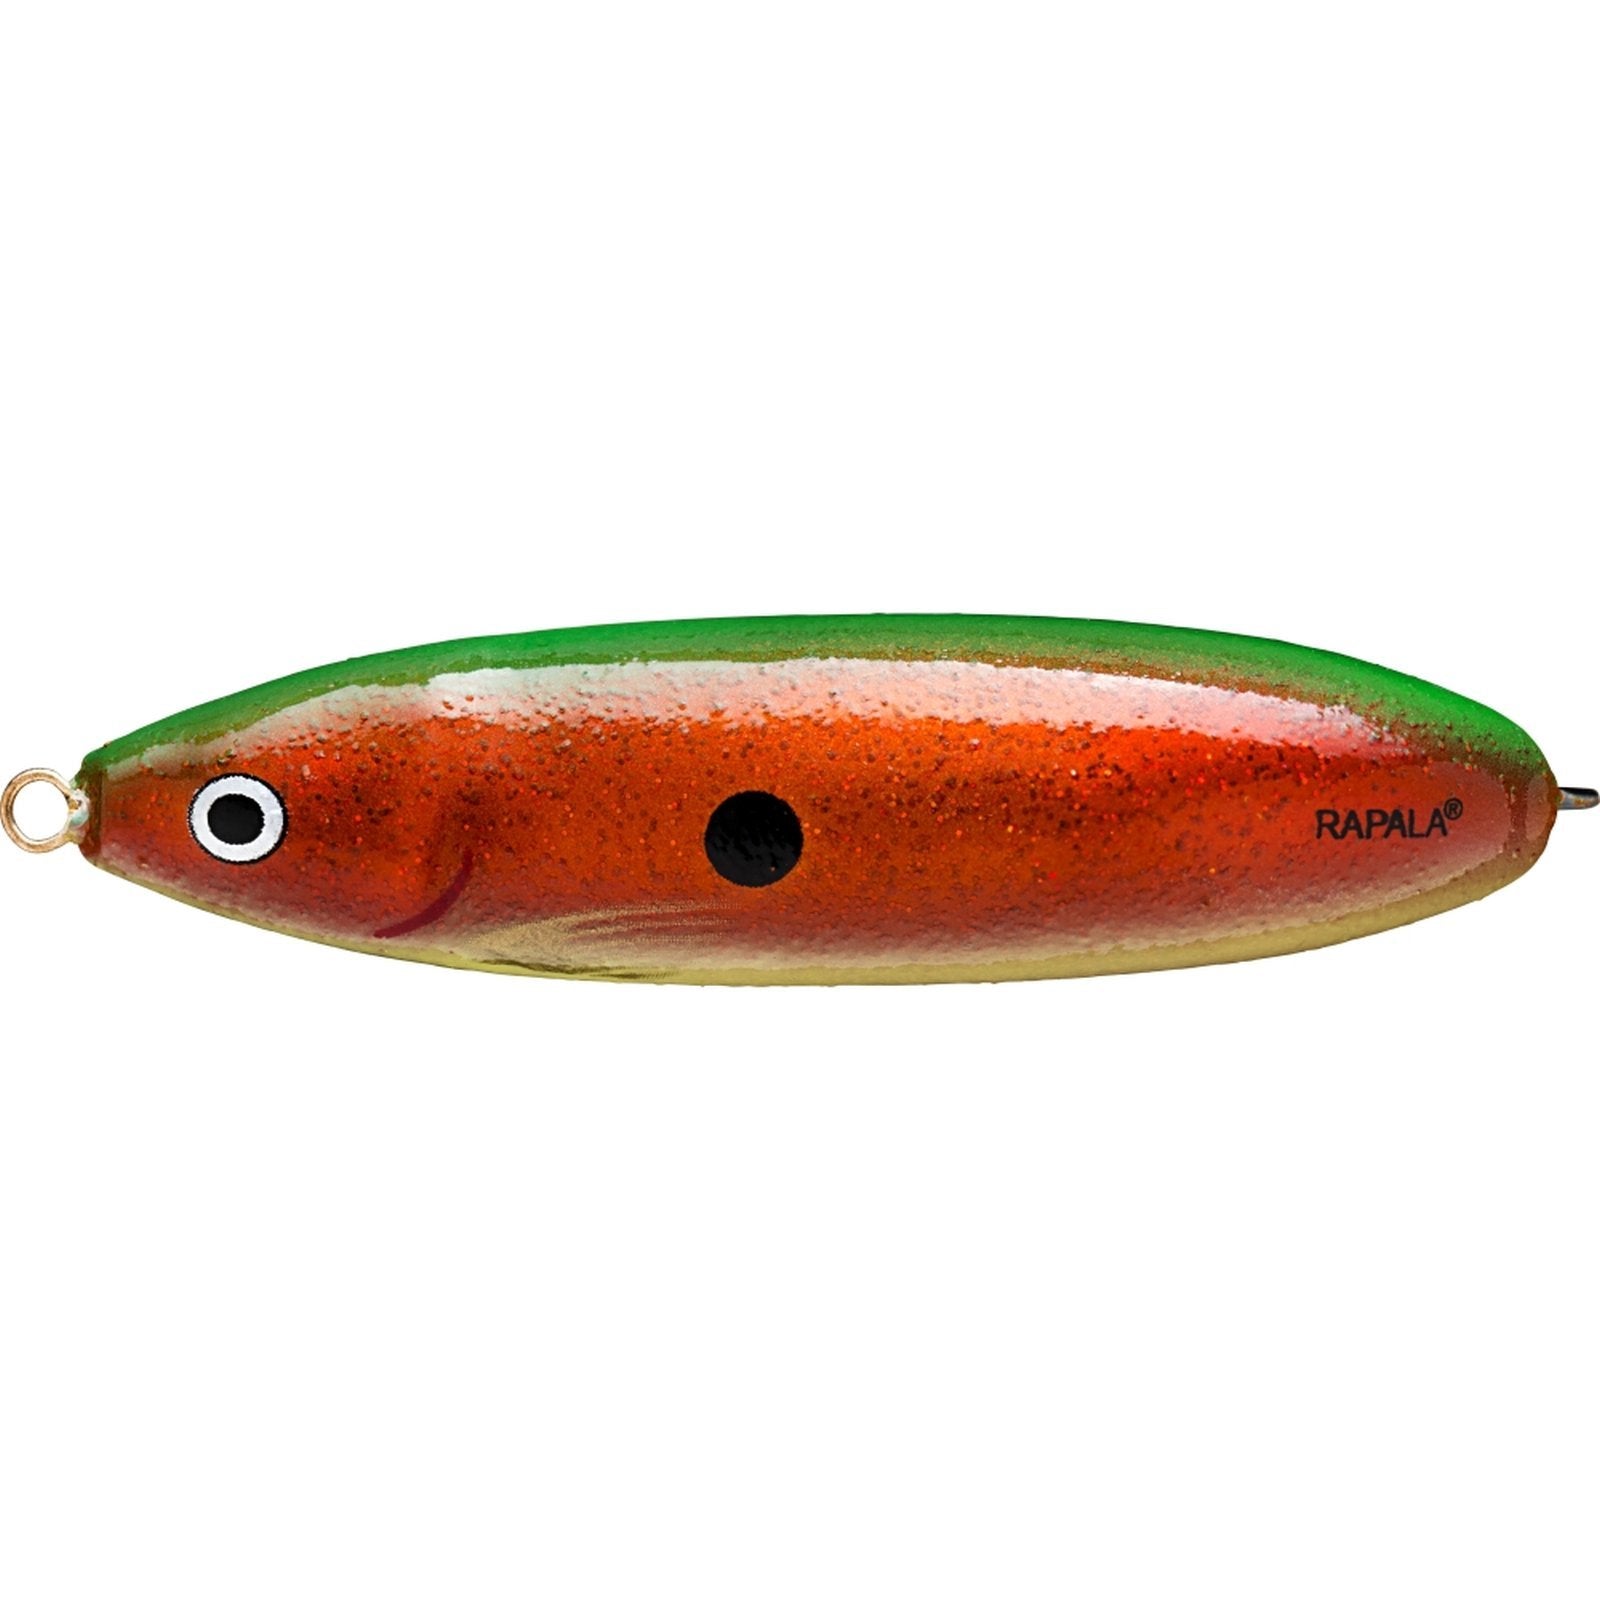 Rapala Weedless Minnow Spoon 8 HFCGR Hologram Flake Copper Green